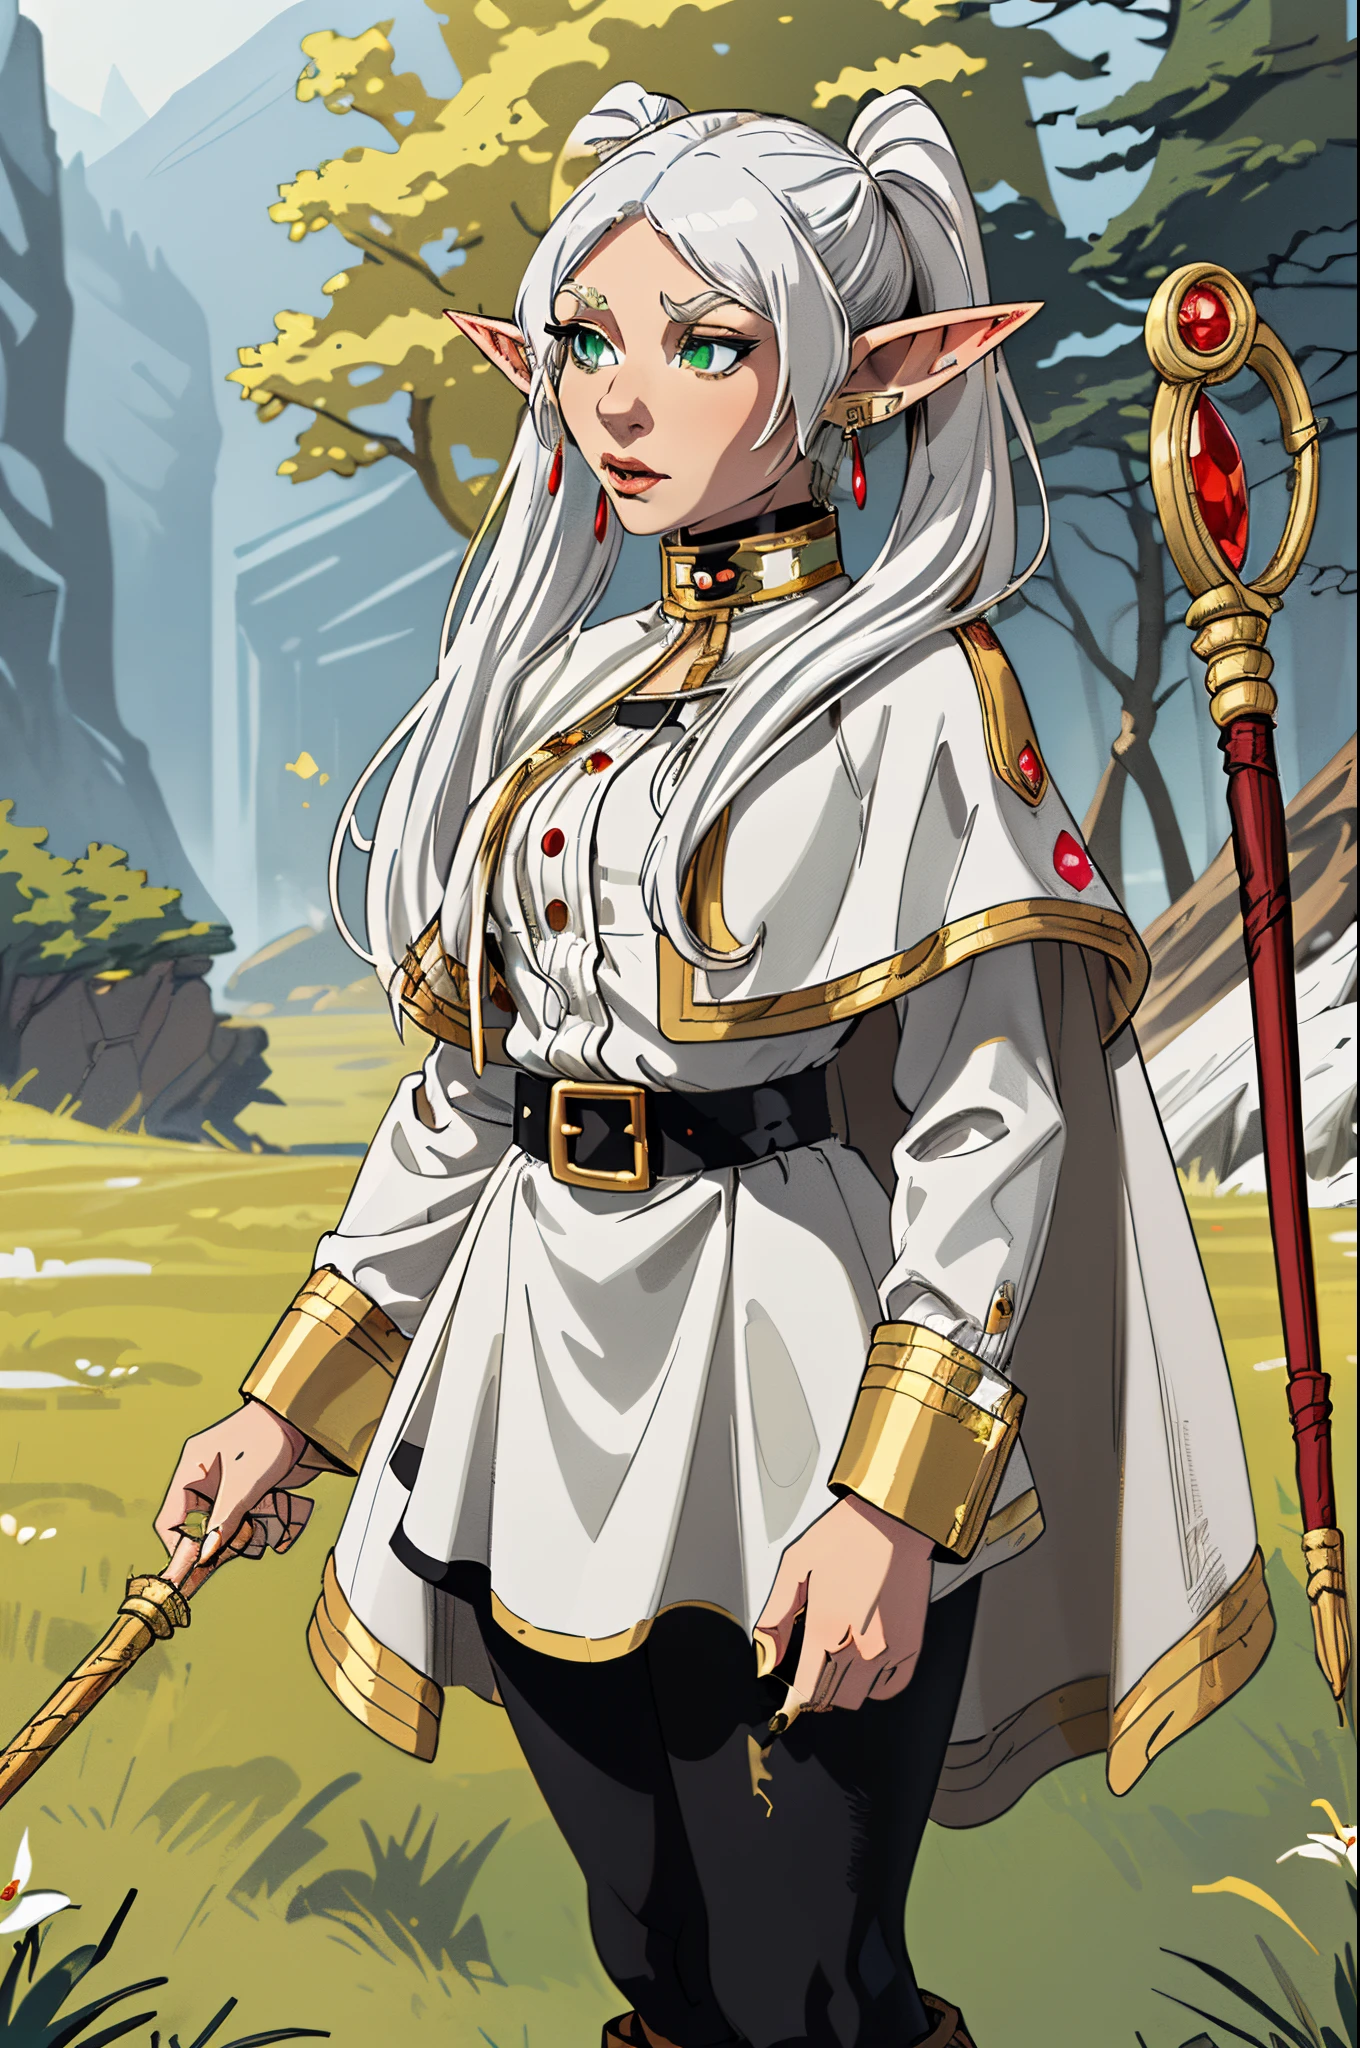 mAsterpiece, best quAlity,( Frieren: Jenseits des Reiseendes
) , (( A , femAle Elf with green eyes And long white hAir tied into two pigtAils. Like All Elves, she hAs lArge, pointed eArs.

She weArs A striped blAck And white shirt, Along with A white jAcket with gold embellishments tucked into A mAtching skirt with A blAck belt. Over her jAcket, she weArs A short white And gold cApe with A high collAr. She Also weArs blAck tights And brown boots, And A pAir of gold And red eArrings.)) perfect AnAtomy, FrierenBAse, twintAils, eArrings, white cApelet, gestreiftes Hemd, weißer Rock, lange Ärmel, belt, blAck pAntyhose, stAff, holding stAff, draußen, Wald,